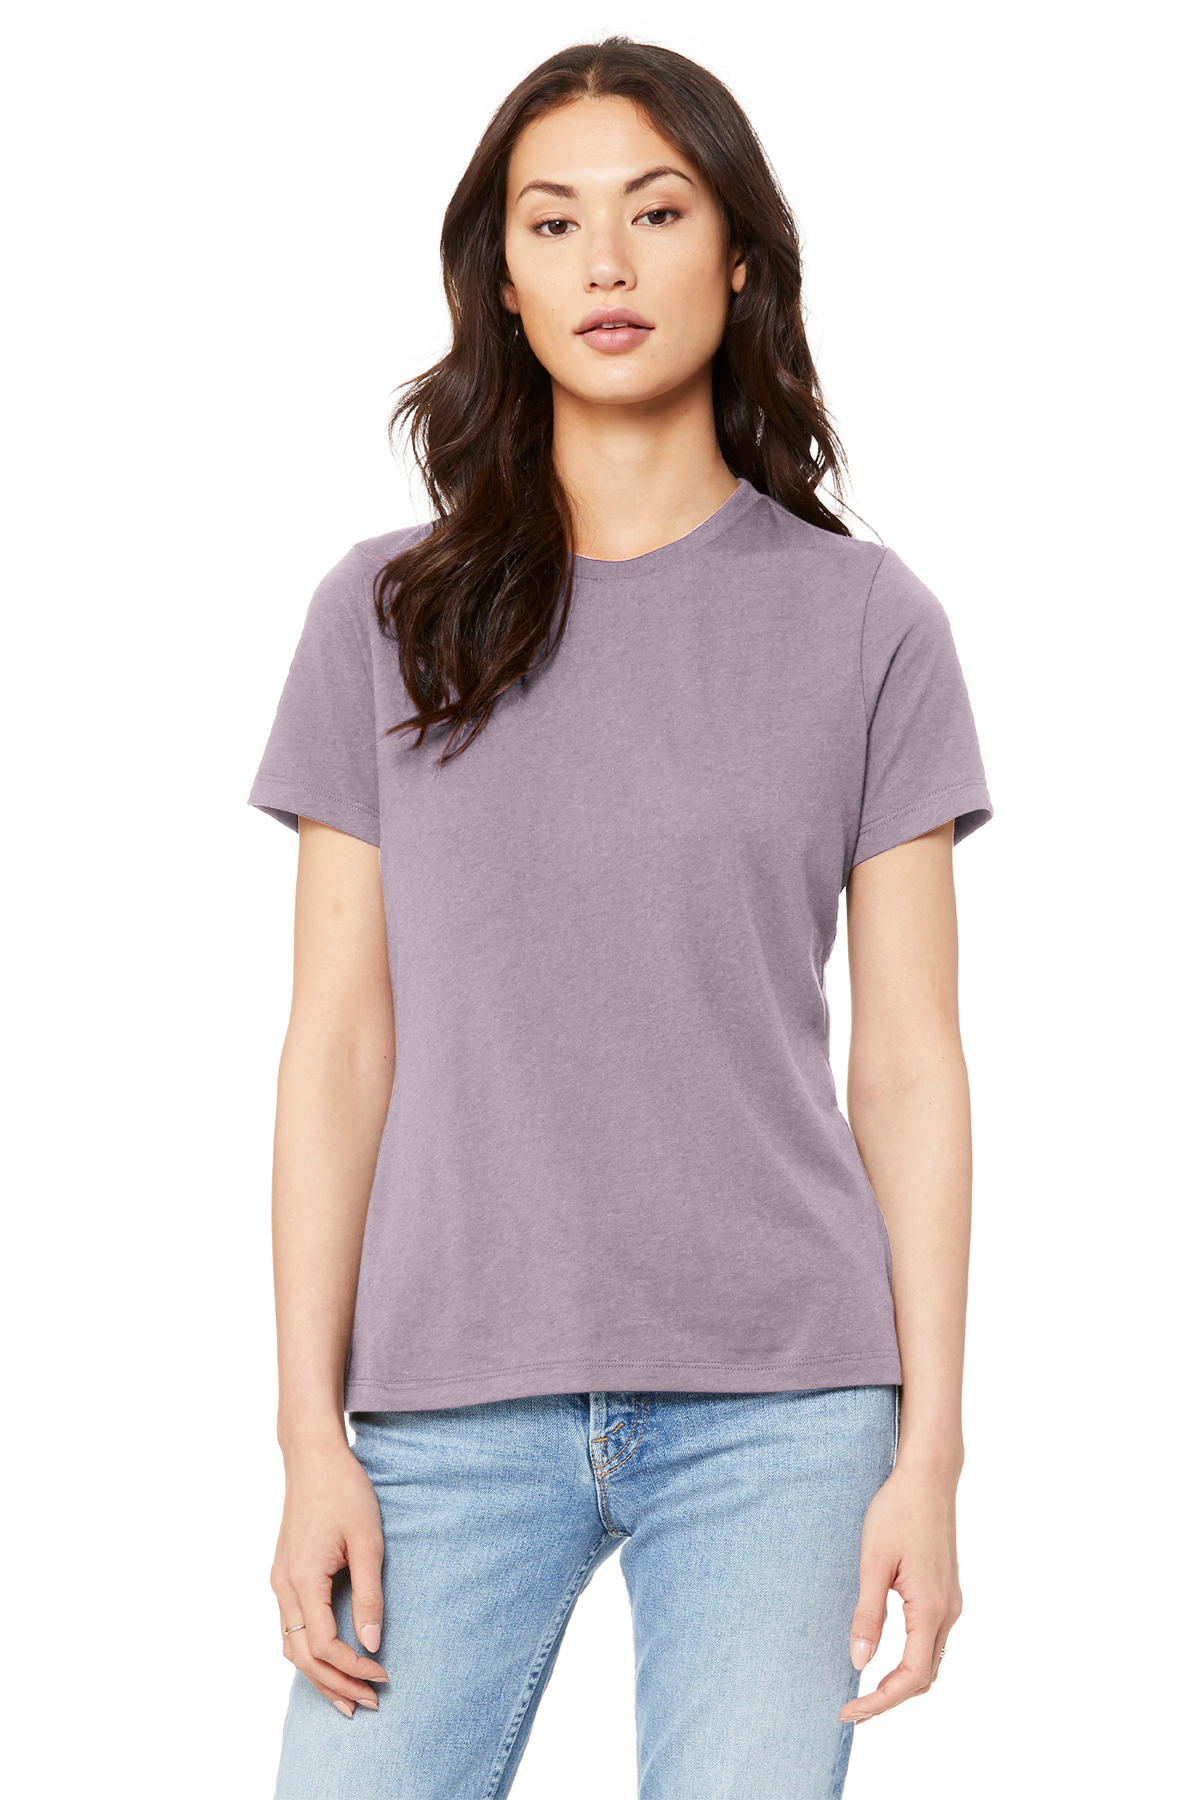 BELLA+CANVAS Women’s Relaxed Jersey Short Sleeve Tee | Product ...